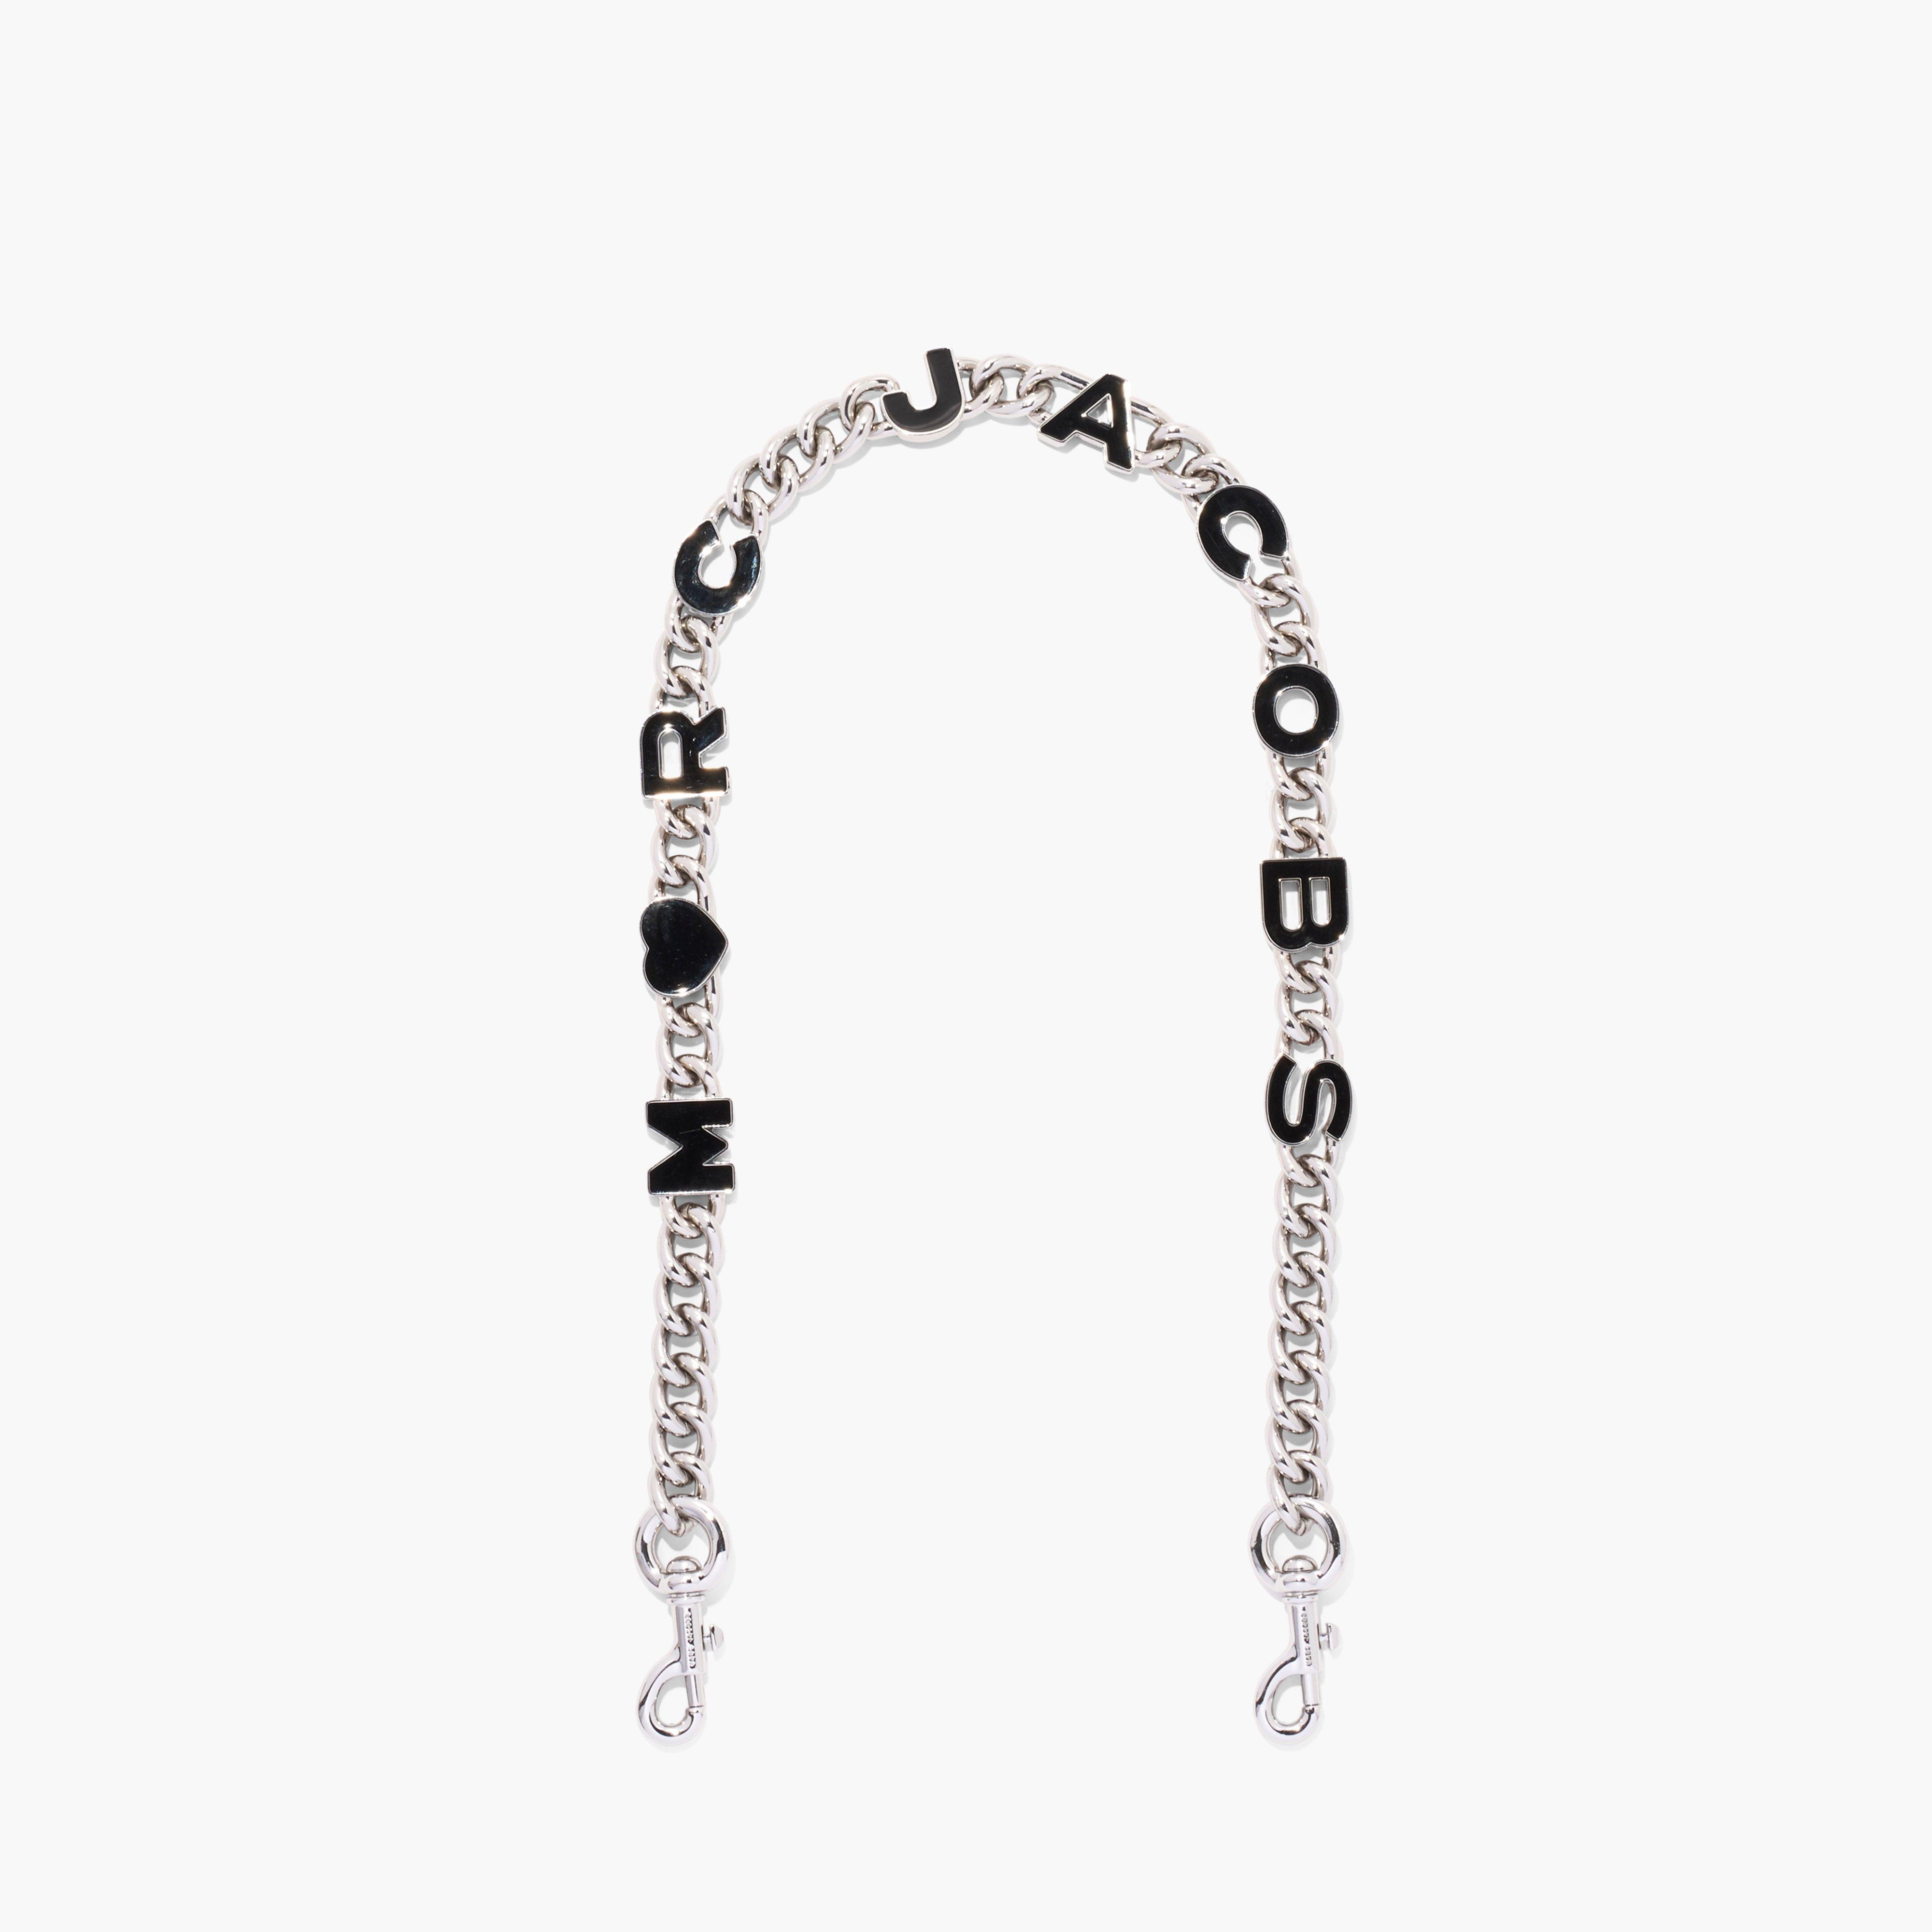 THE HEART CHARM CHAIN SHOULDER STRAP - 1